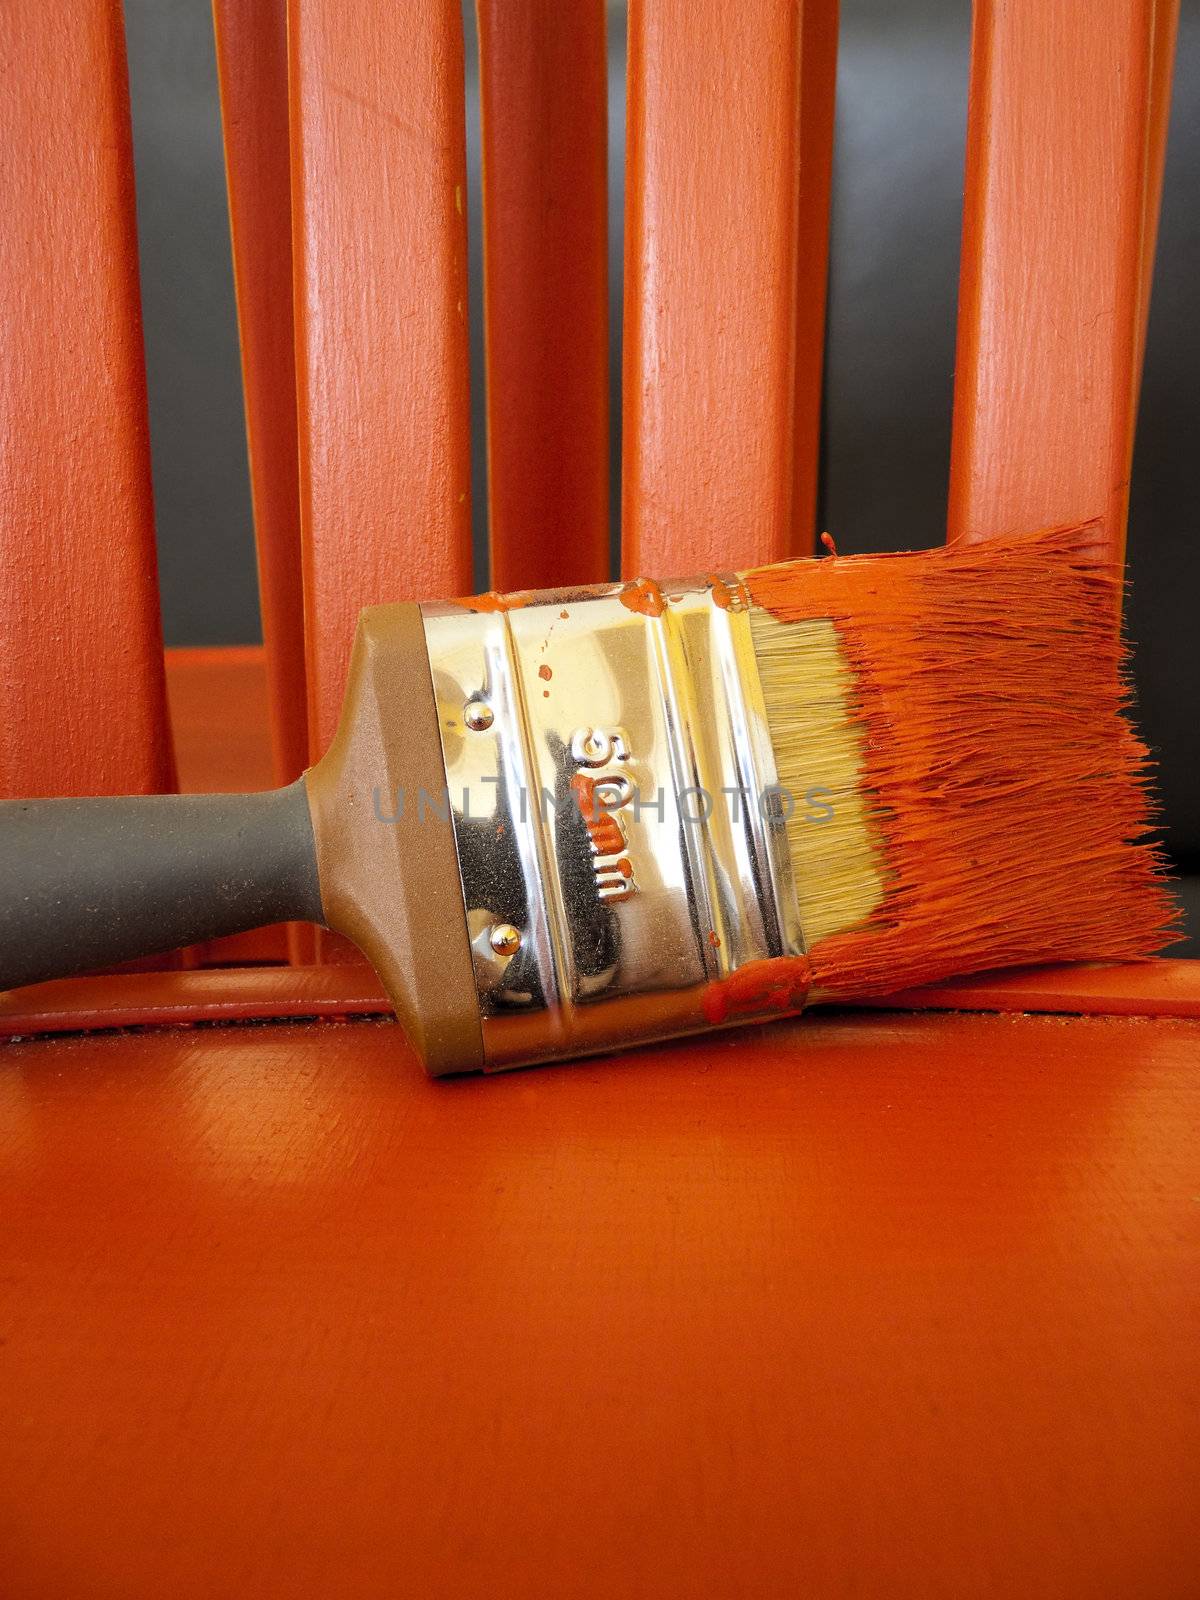 the  red brushes on red painting